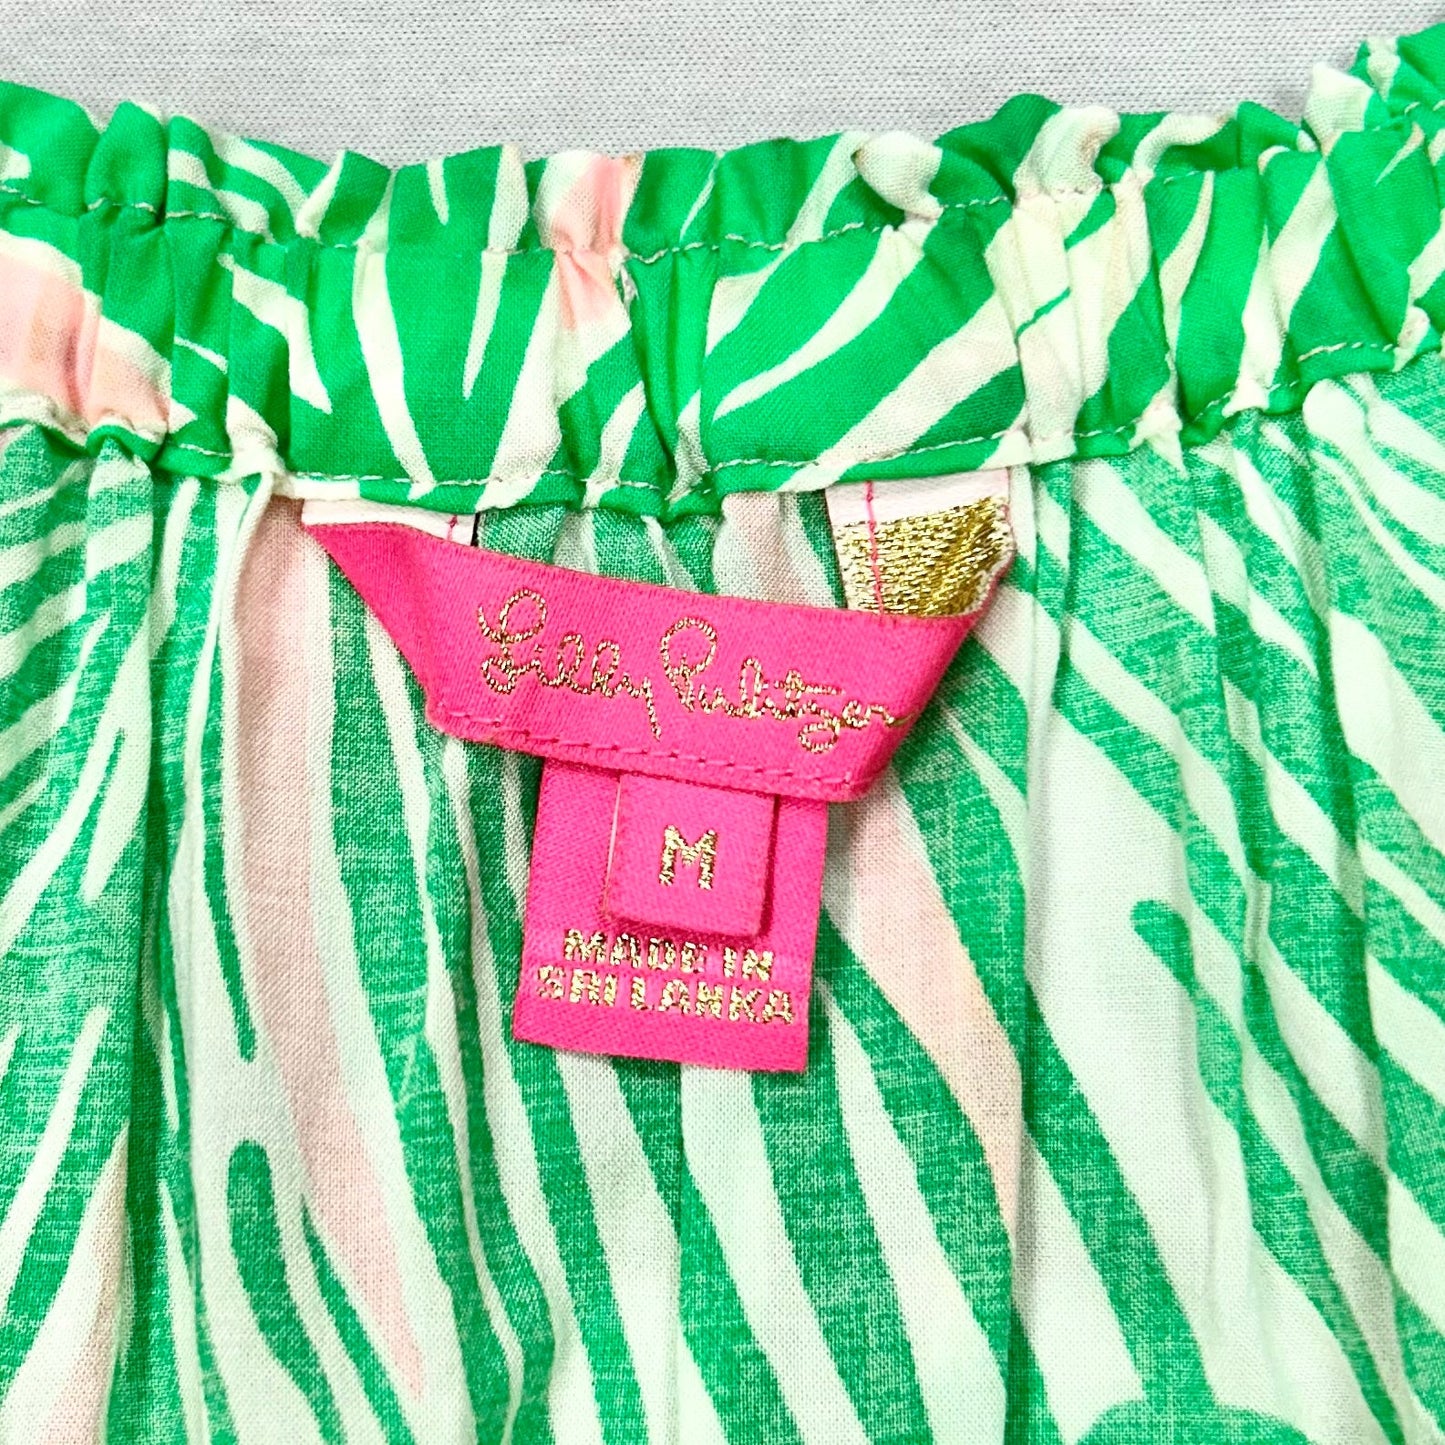 Green & Pink Top Long Sleeve By Lilly Pulitzer, Size: M